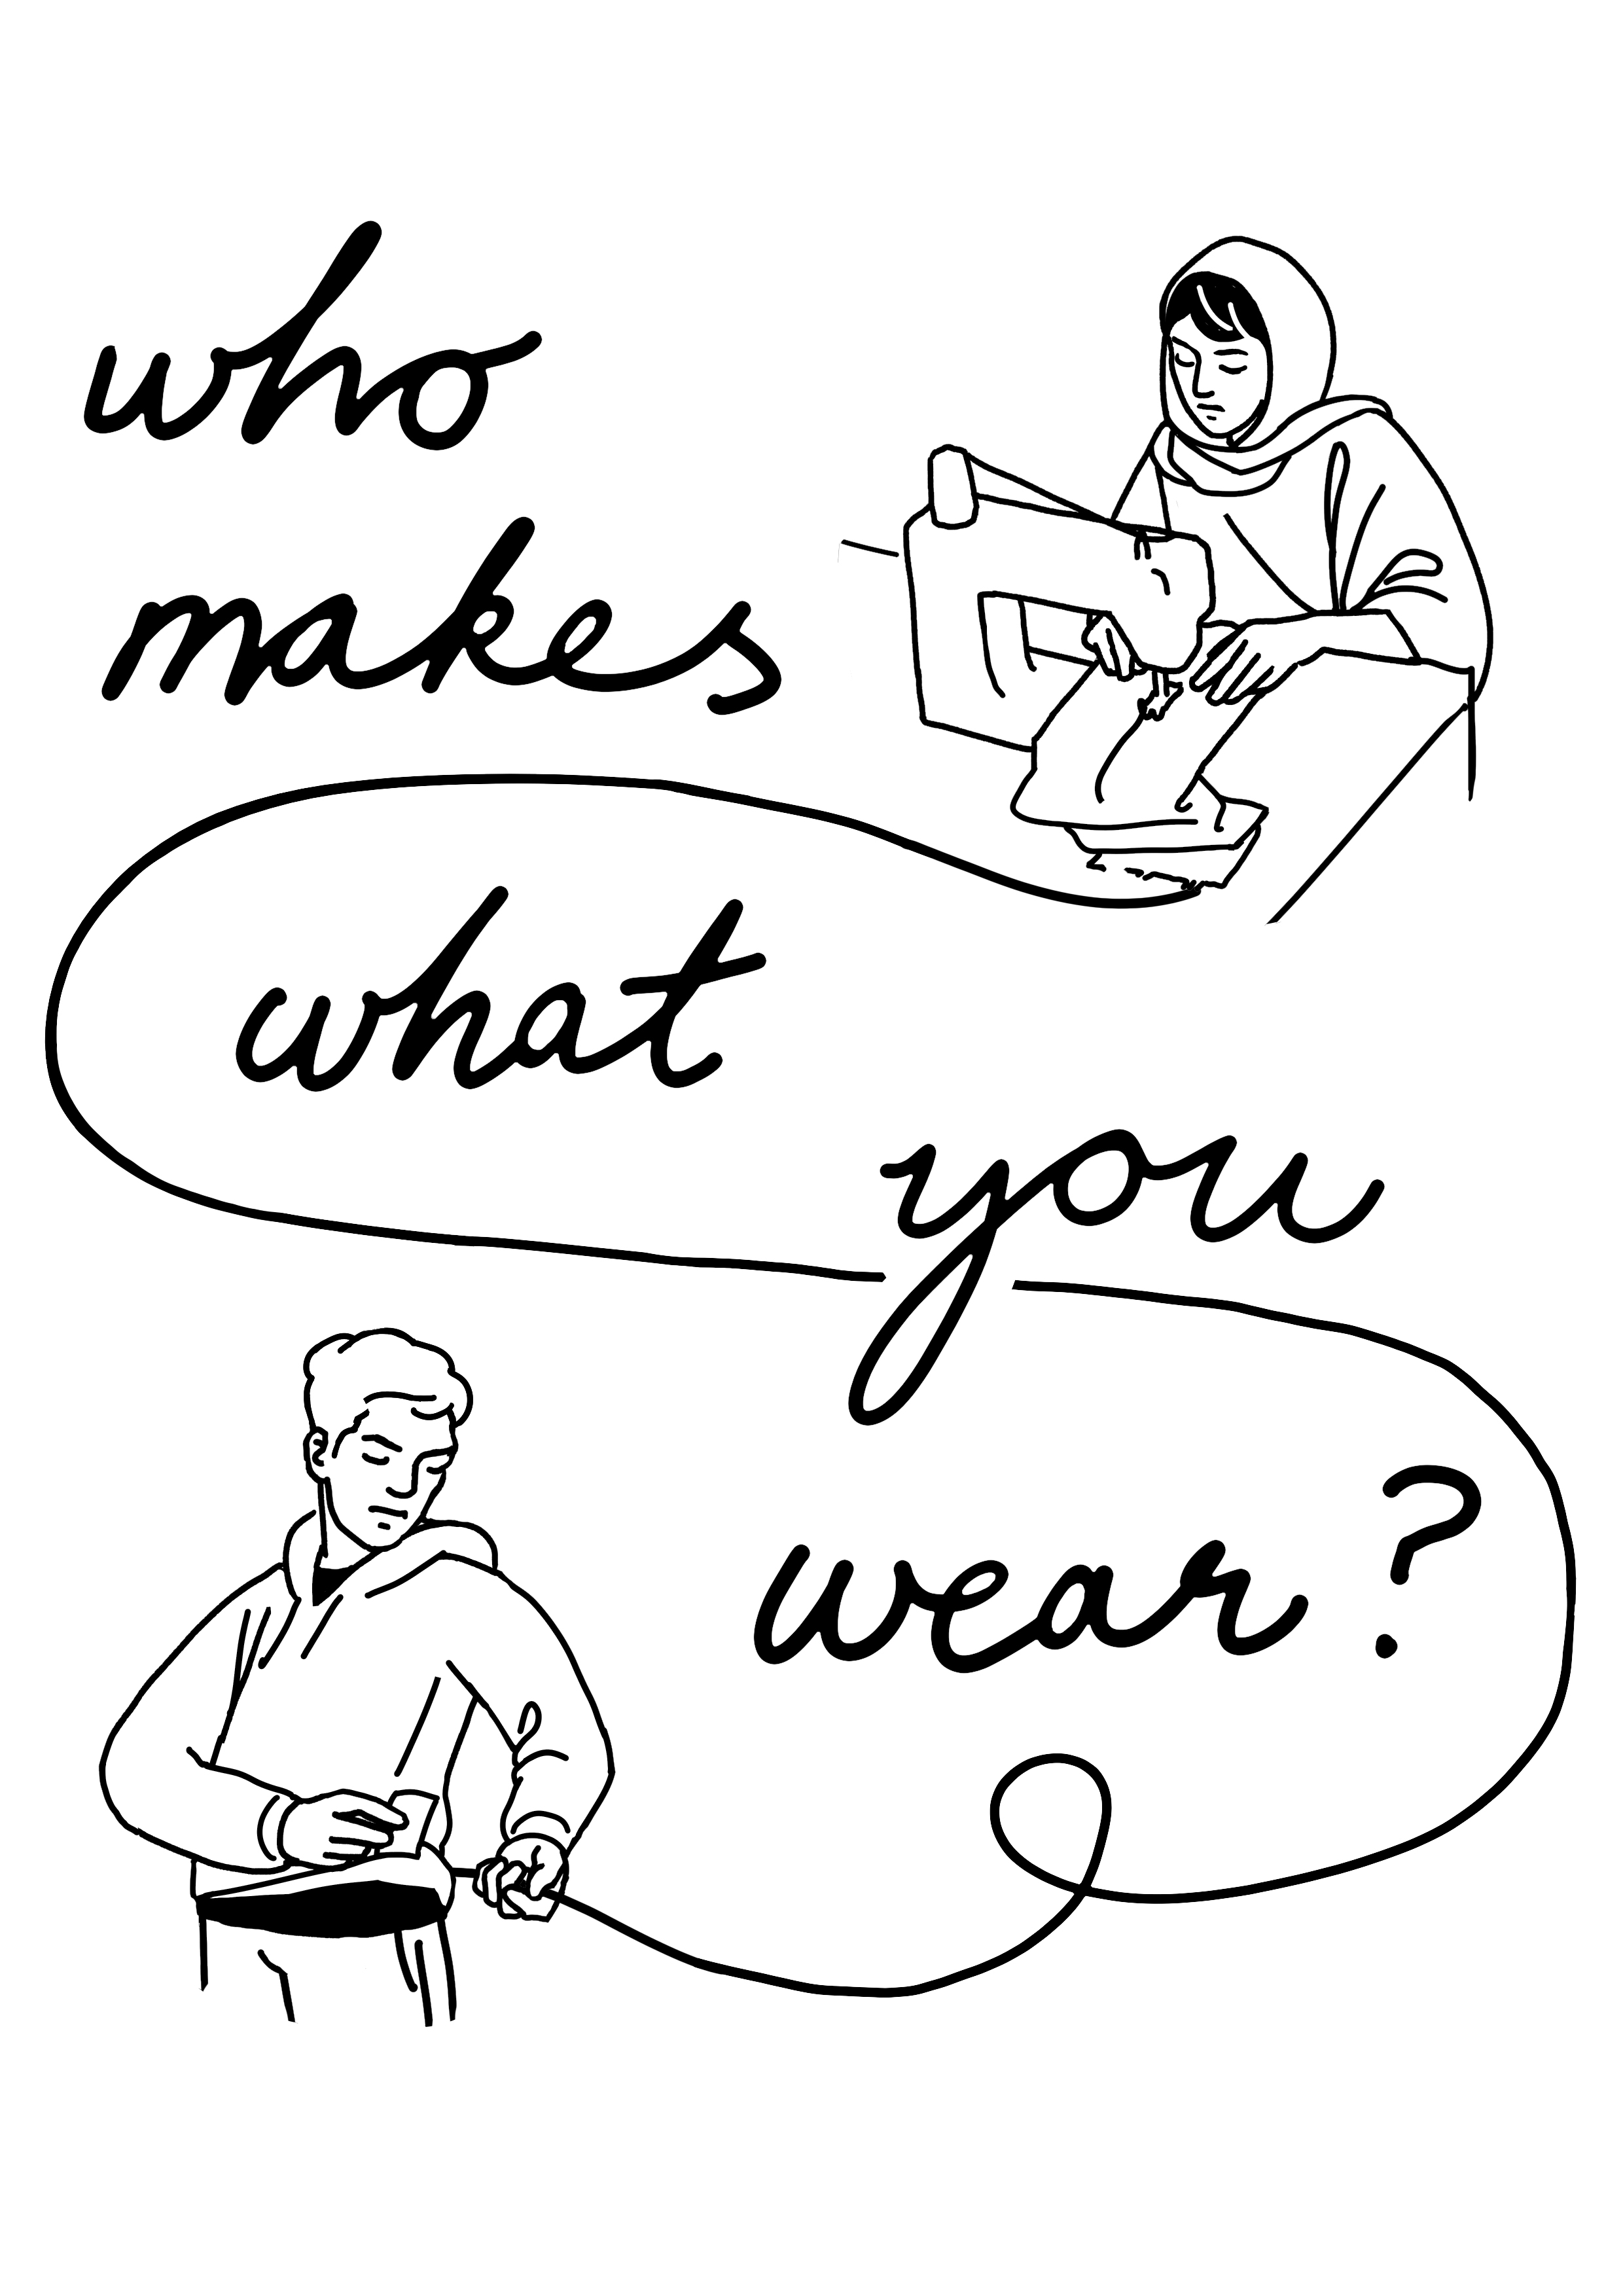 Text: who makes what you wear?, Image: Garment industry worker connected to consumer by textile thread